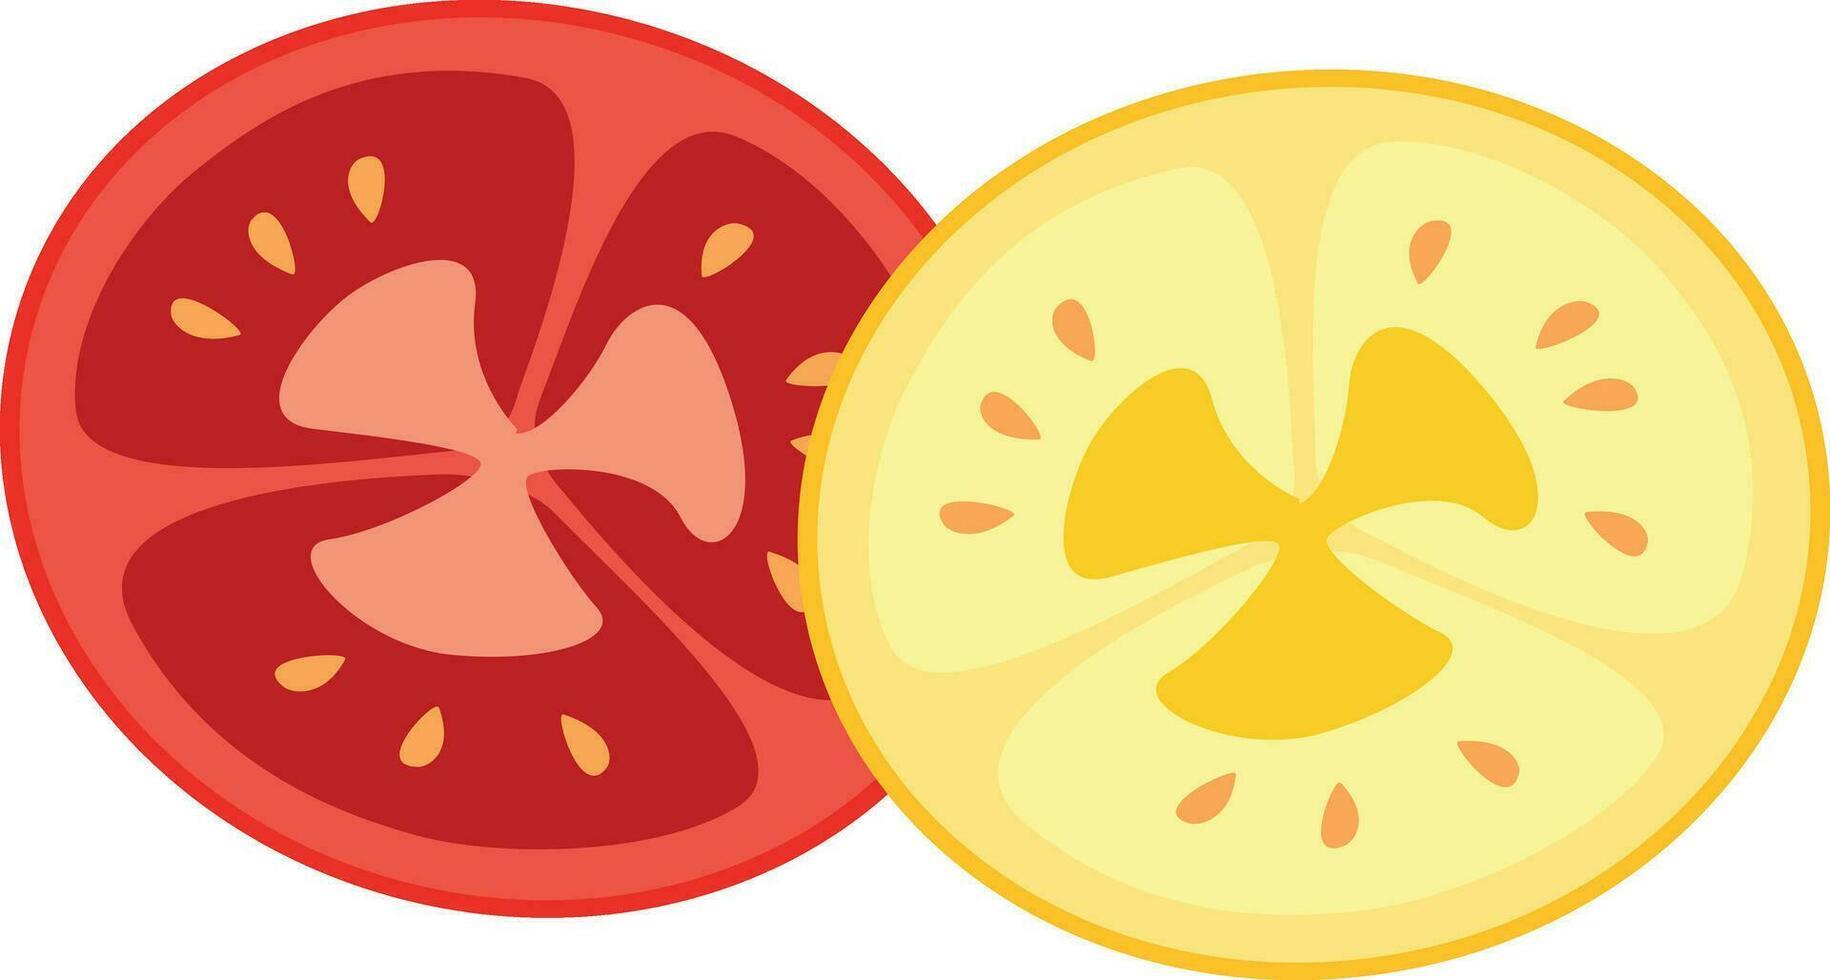 red and yellow tomato slice vector